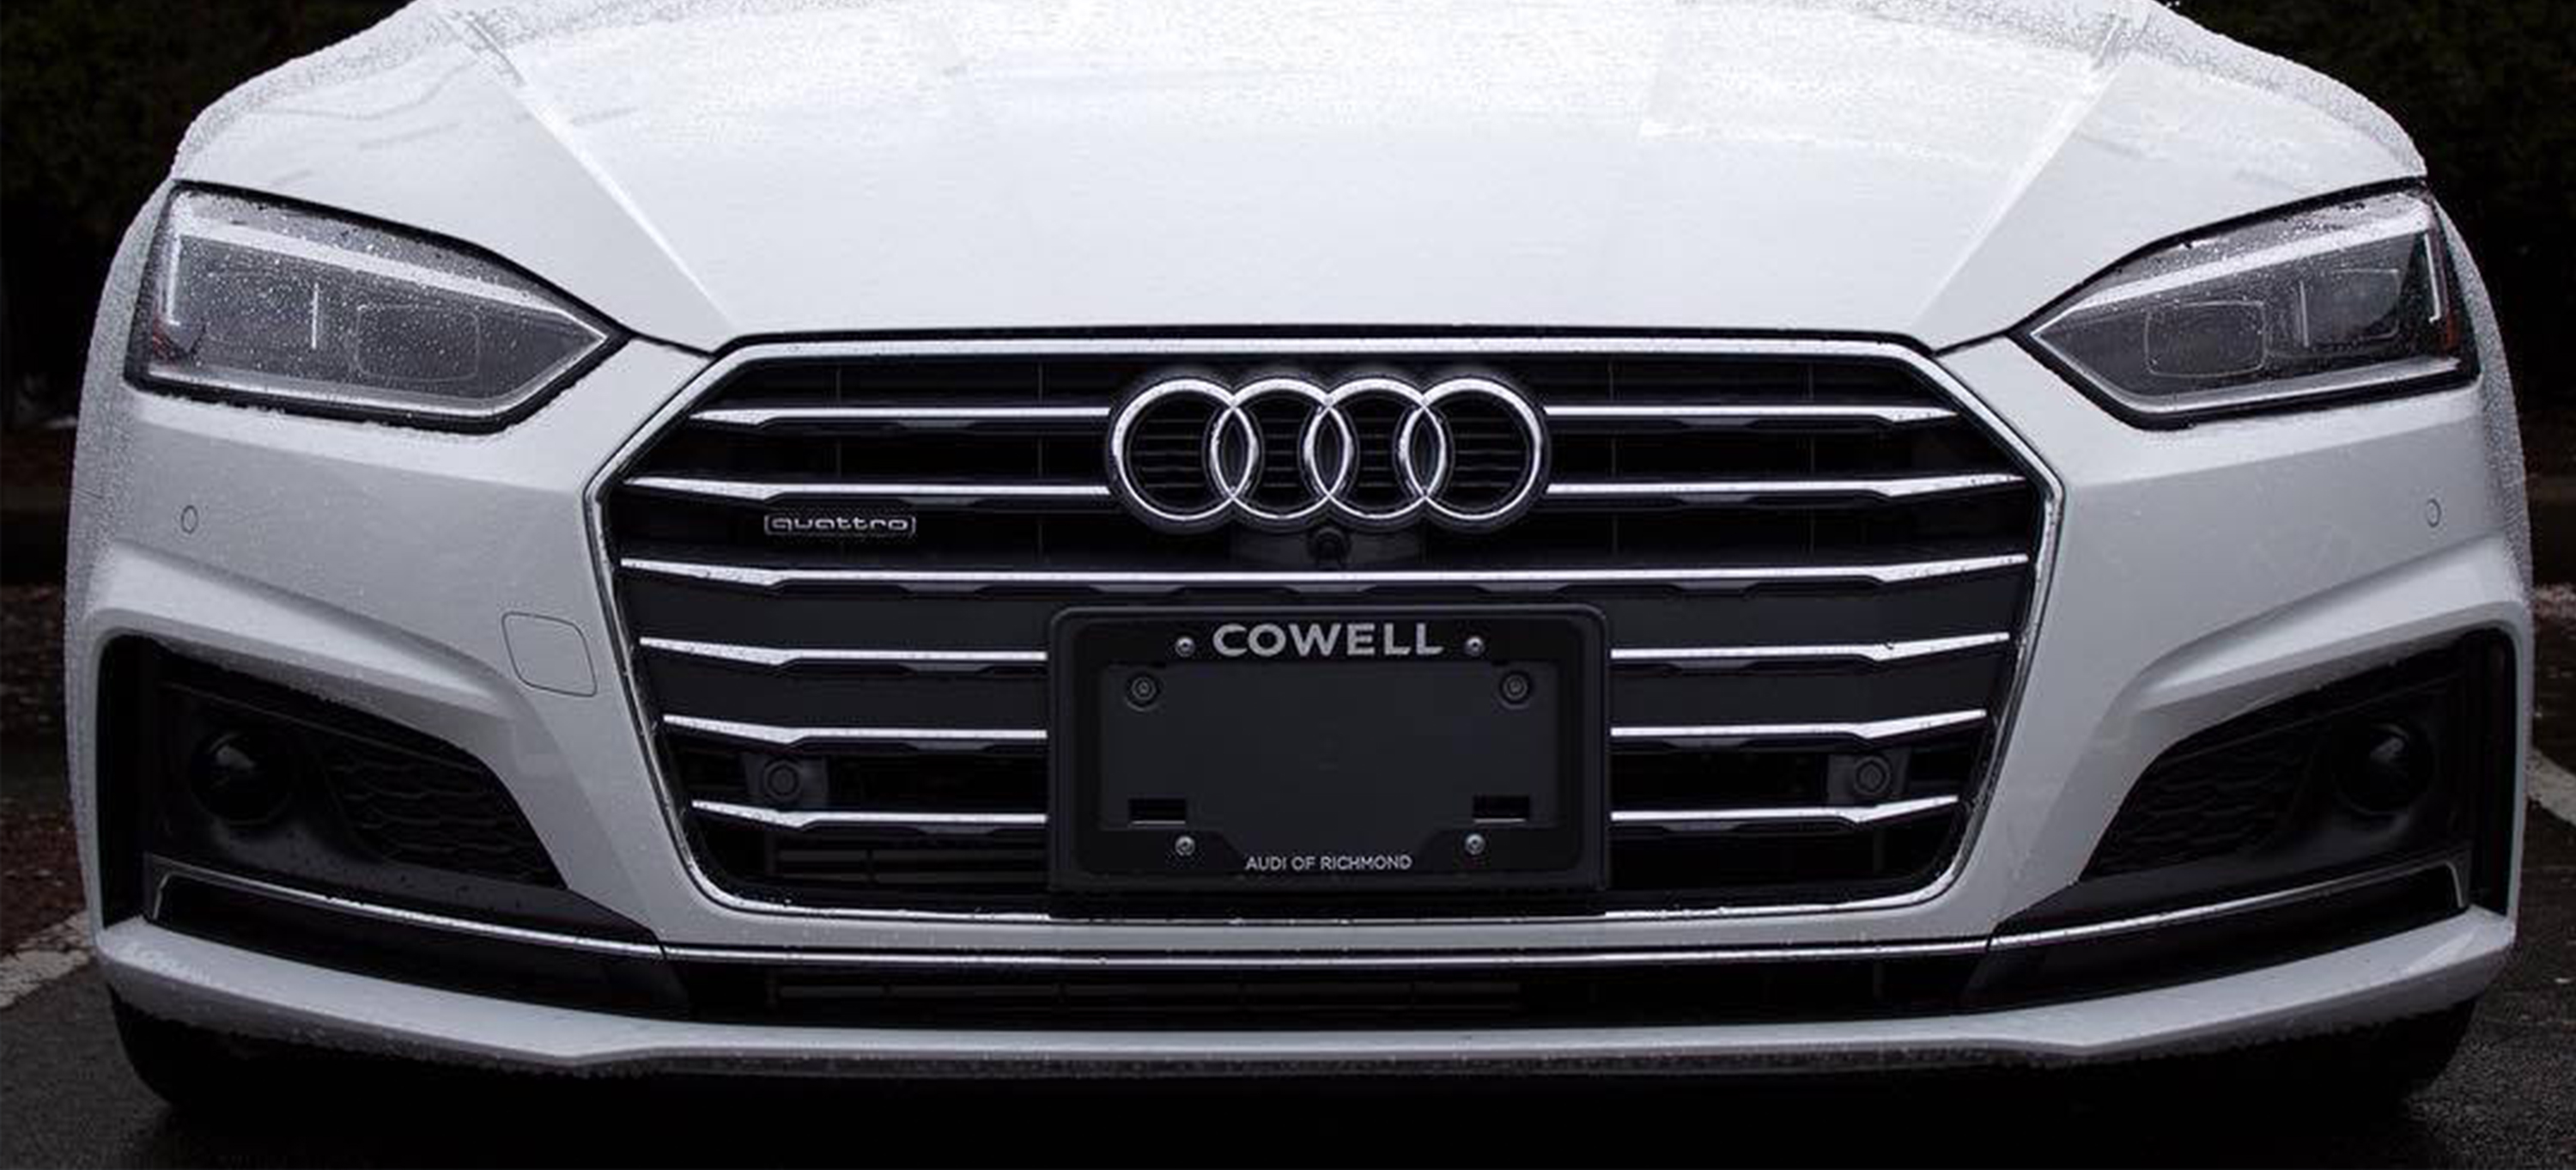 Cowell Licence Plate Grill | Dossier Creative | Auto Dealership Desire to Innovate